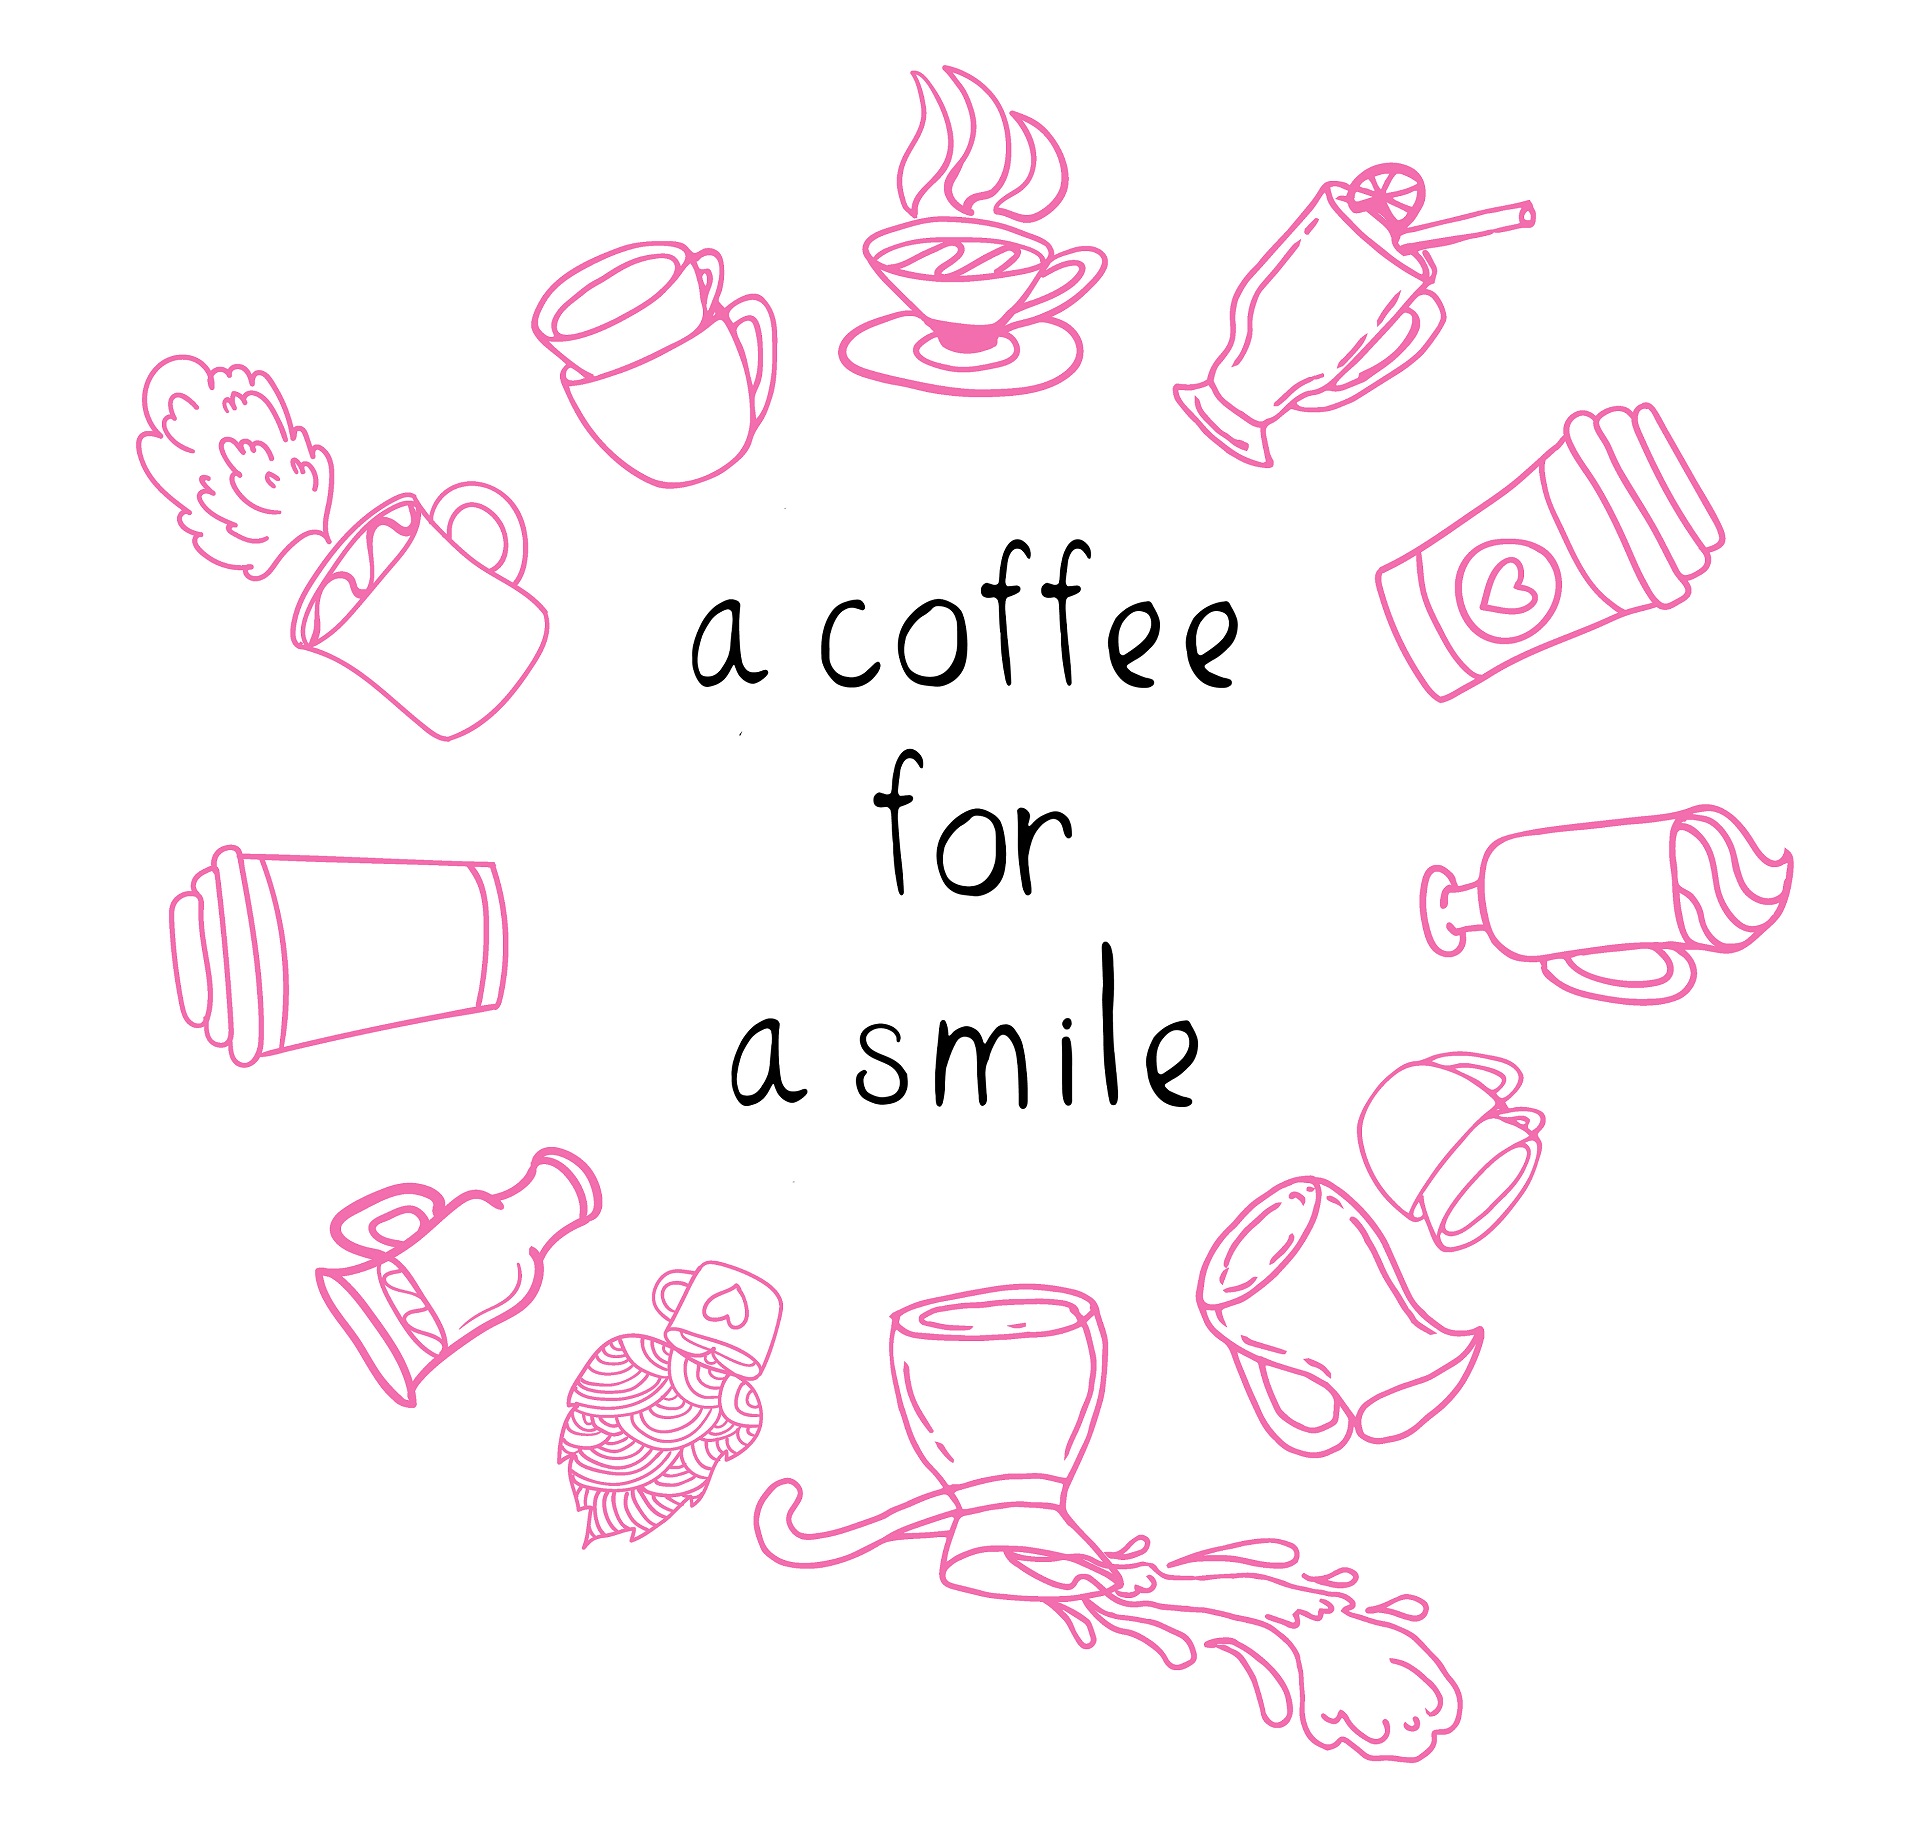 A coffe for a smile